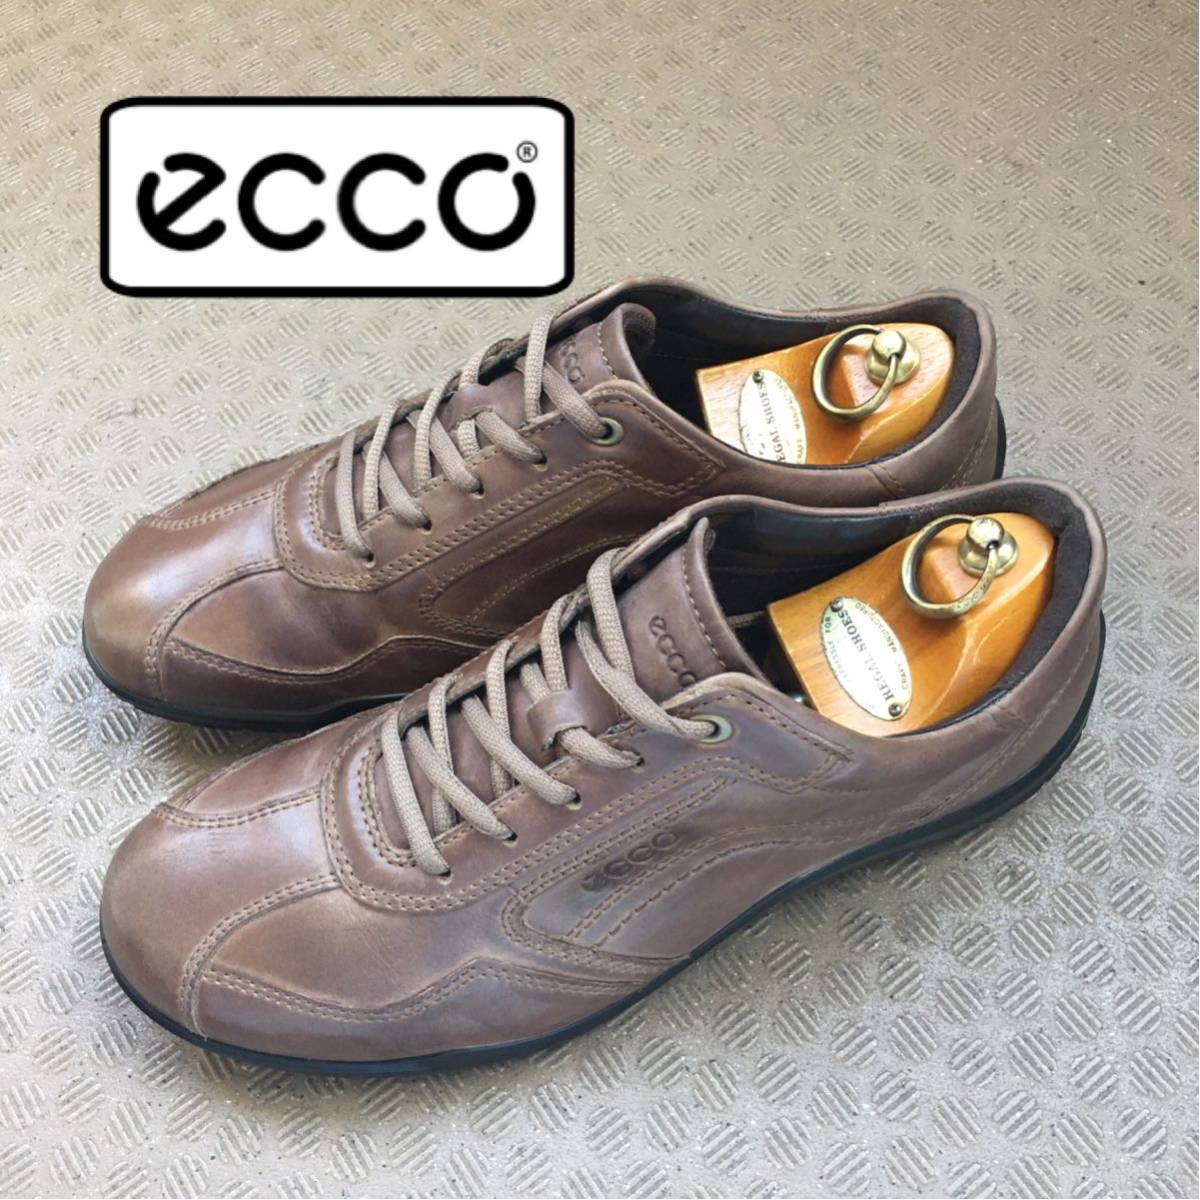 *[ ecco ]* men's leather comfort shoes walking sneakers * size 42